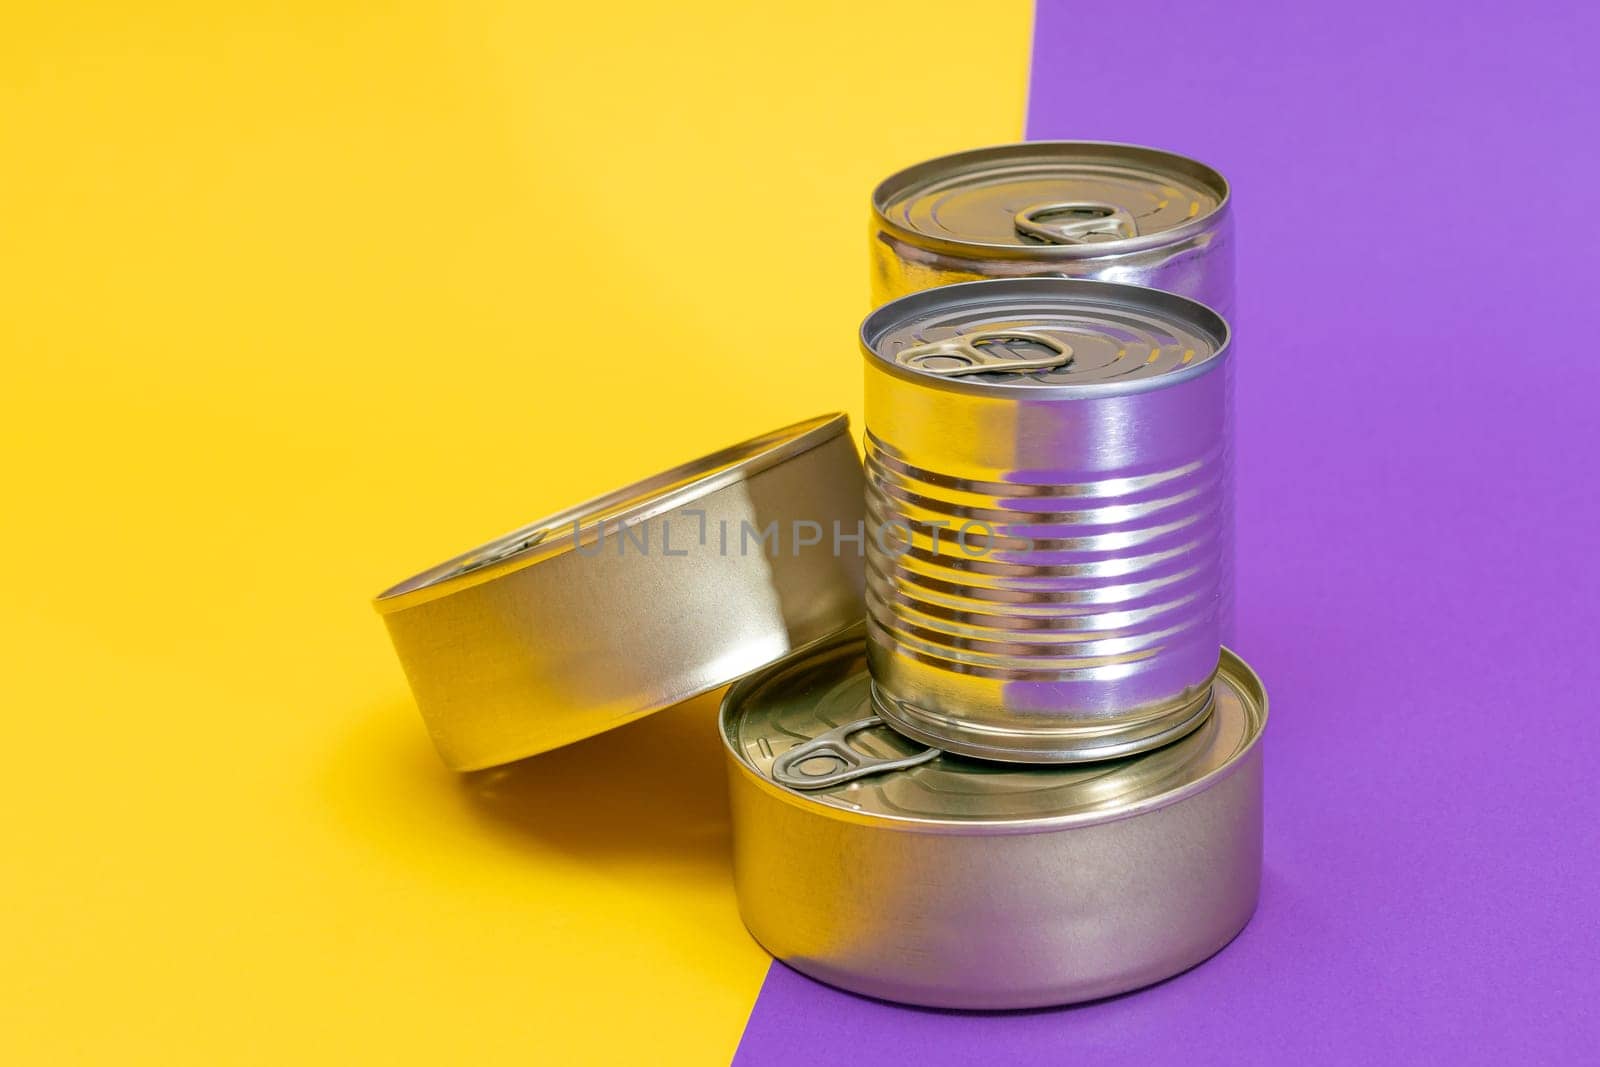 A Group of Stacked Tin Cans with Blank Edges on Split Yellow and Violet Background. Canned Food. Different Aluminum Cans for Safe and Long Term Storage of Food. Steel Sealed Food Storage Containers